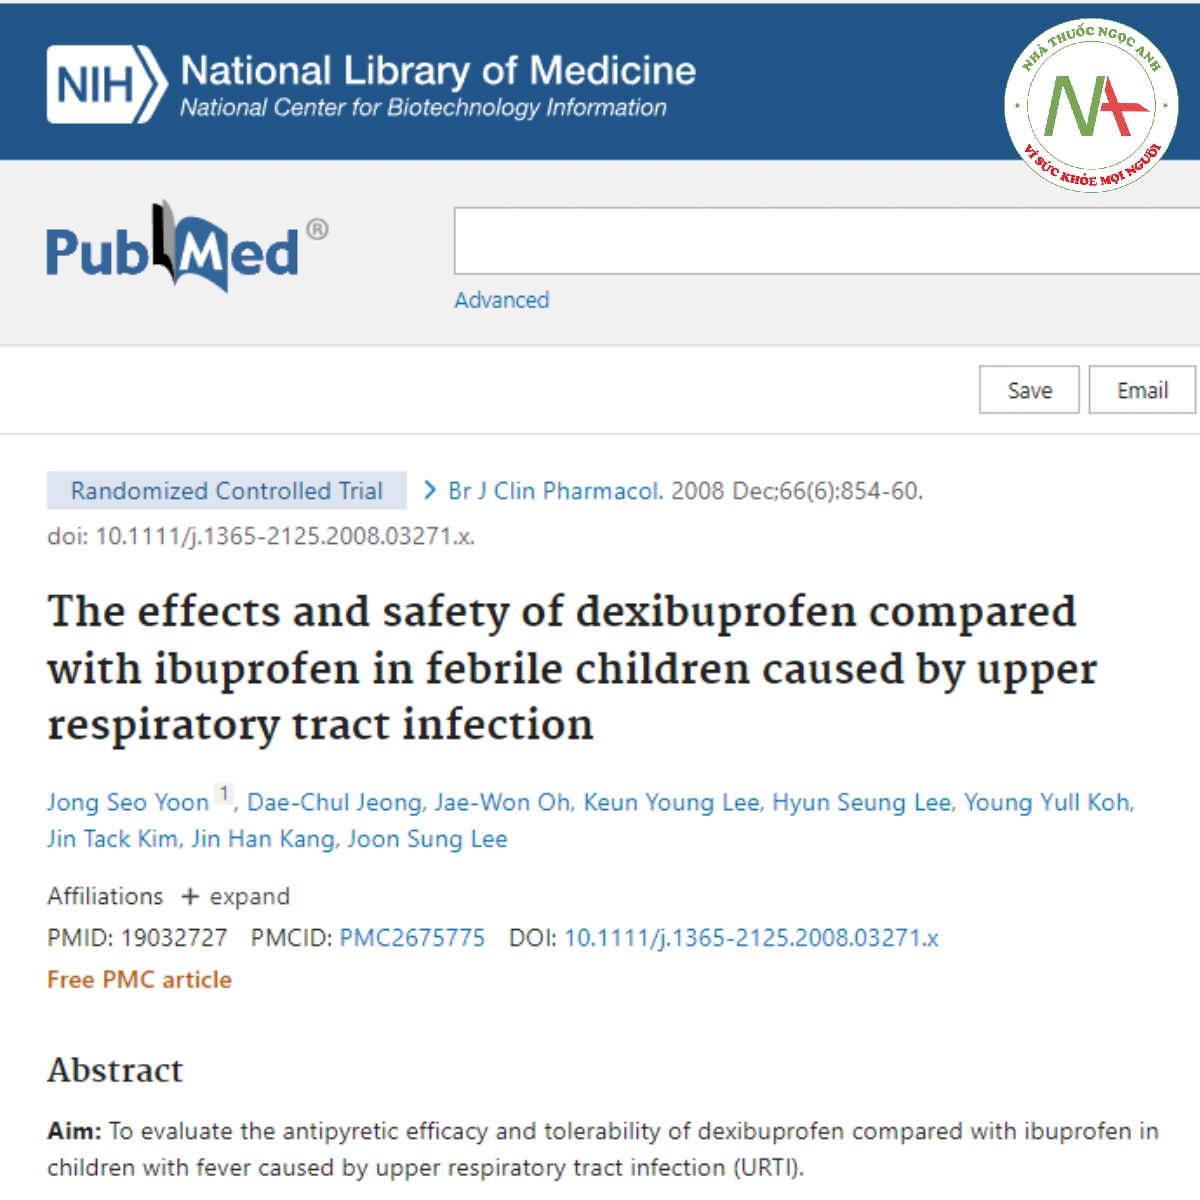 The effects and safety of dexibuprofen compared with ibuprofen in febrile children caused by upper respiratory tract infection